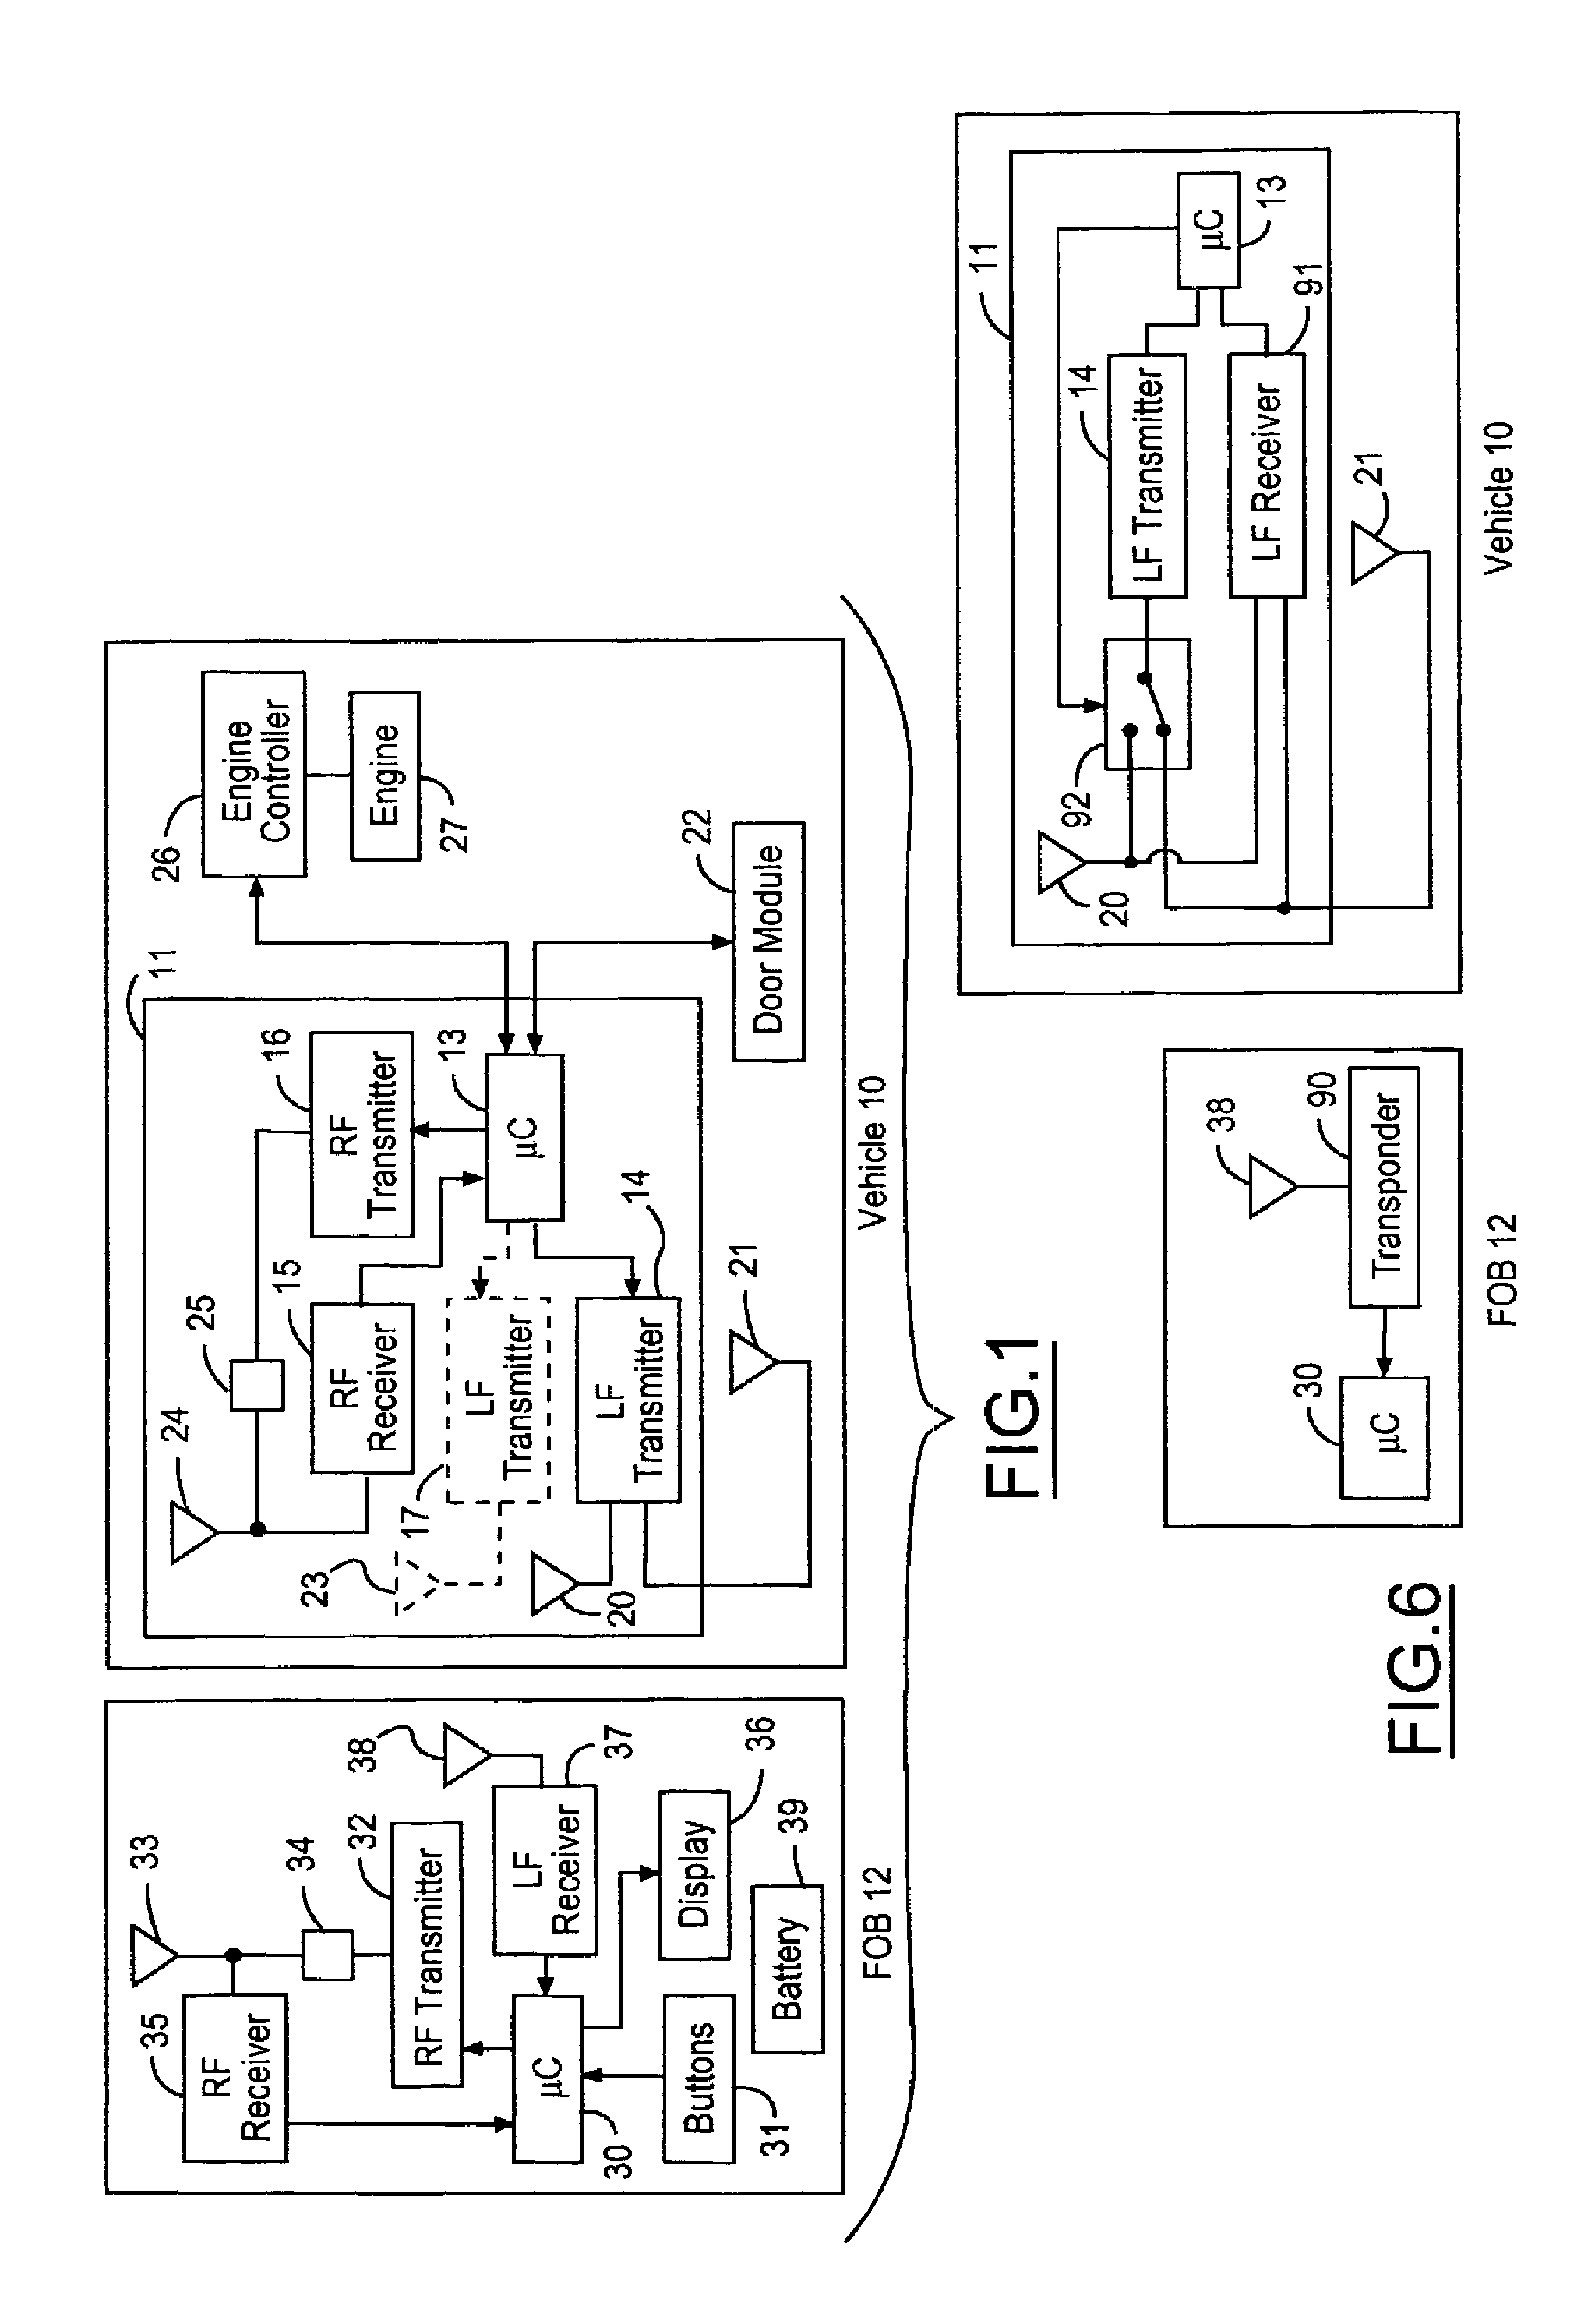 Integrated passive entry and remote keyless entry system